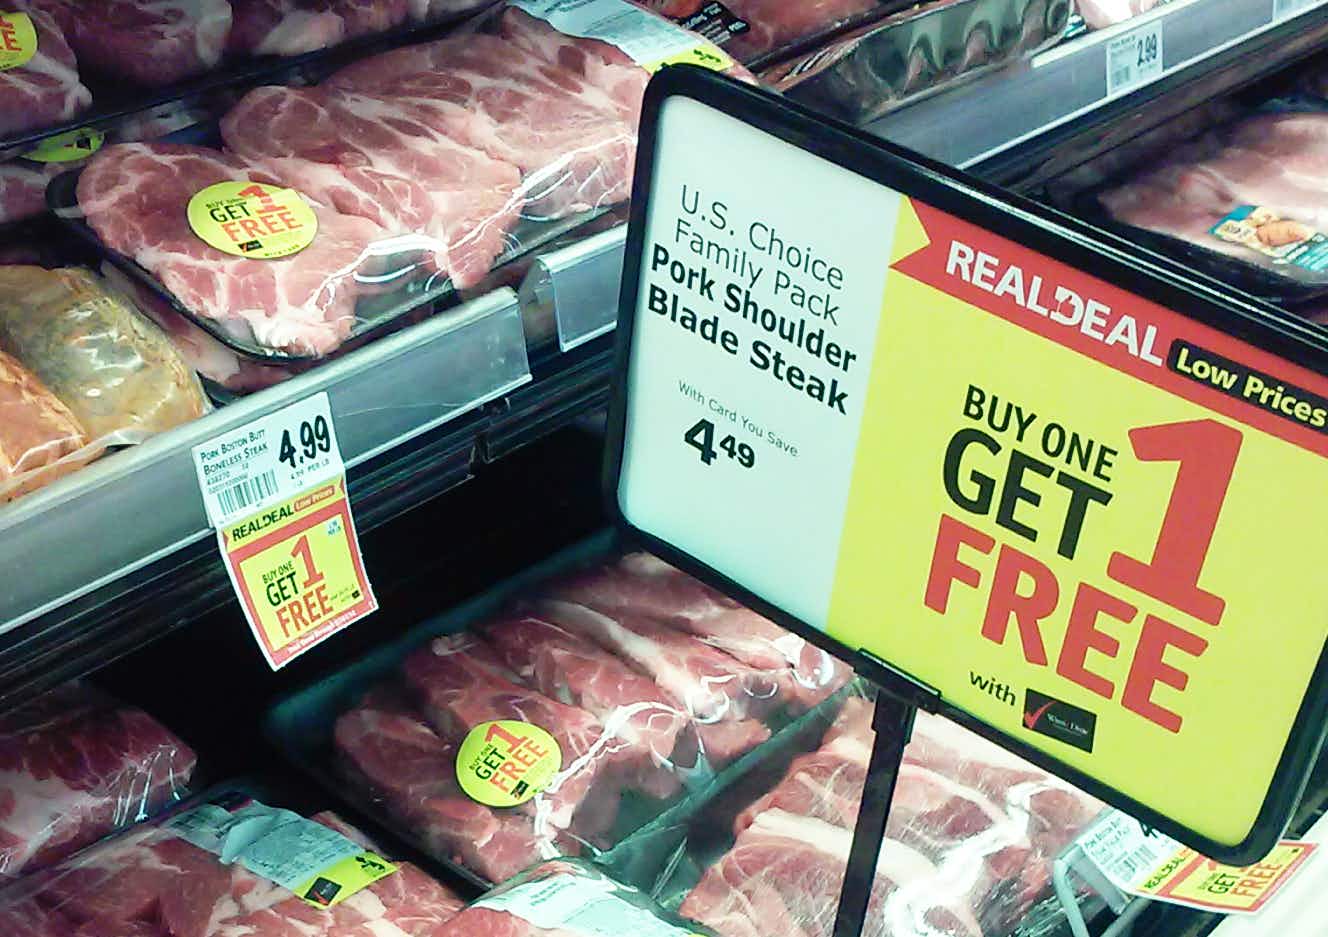 A Buy One Get One promotion sign in a store's meat section.